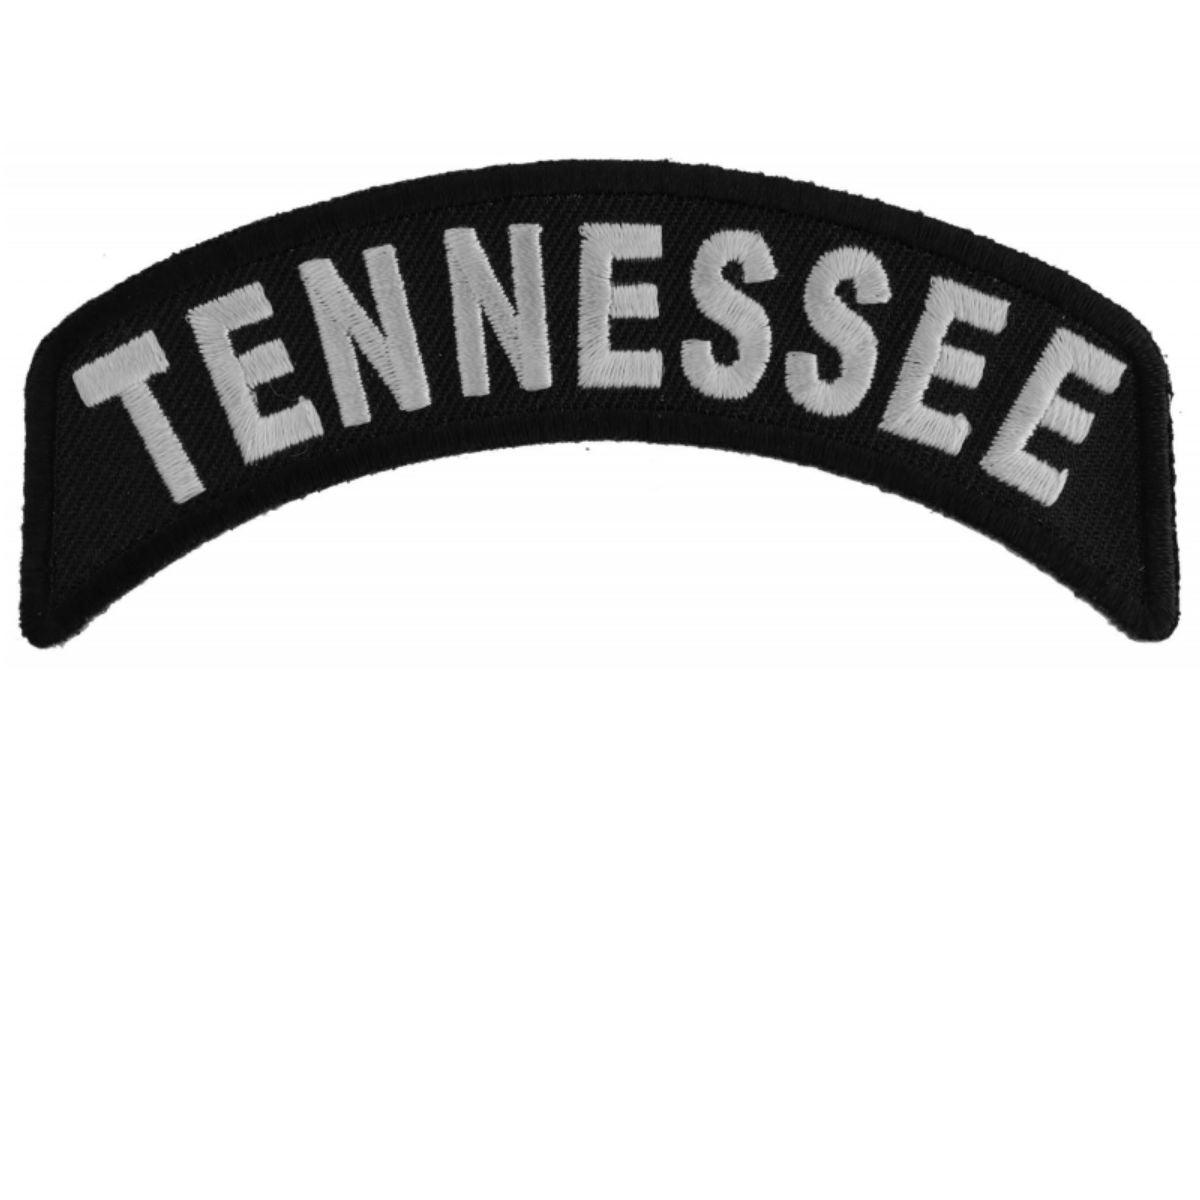 Daniel Smart Tennessee Patch, 4 x 1.75 inches - American Legend Rider